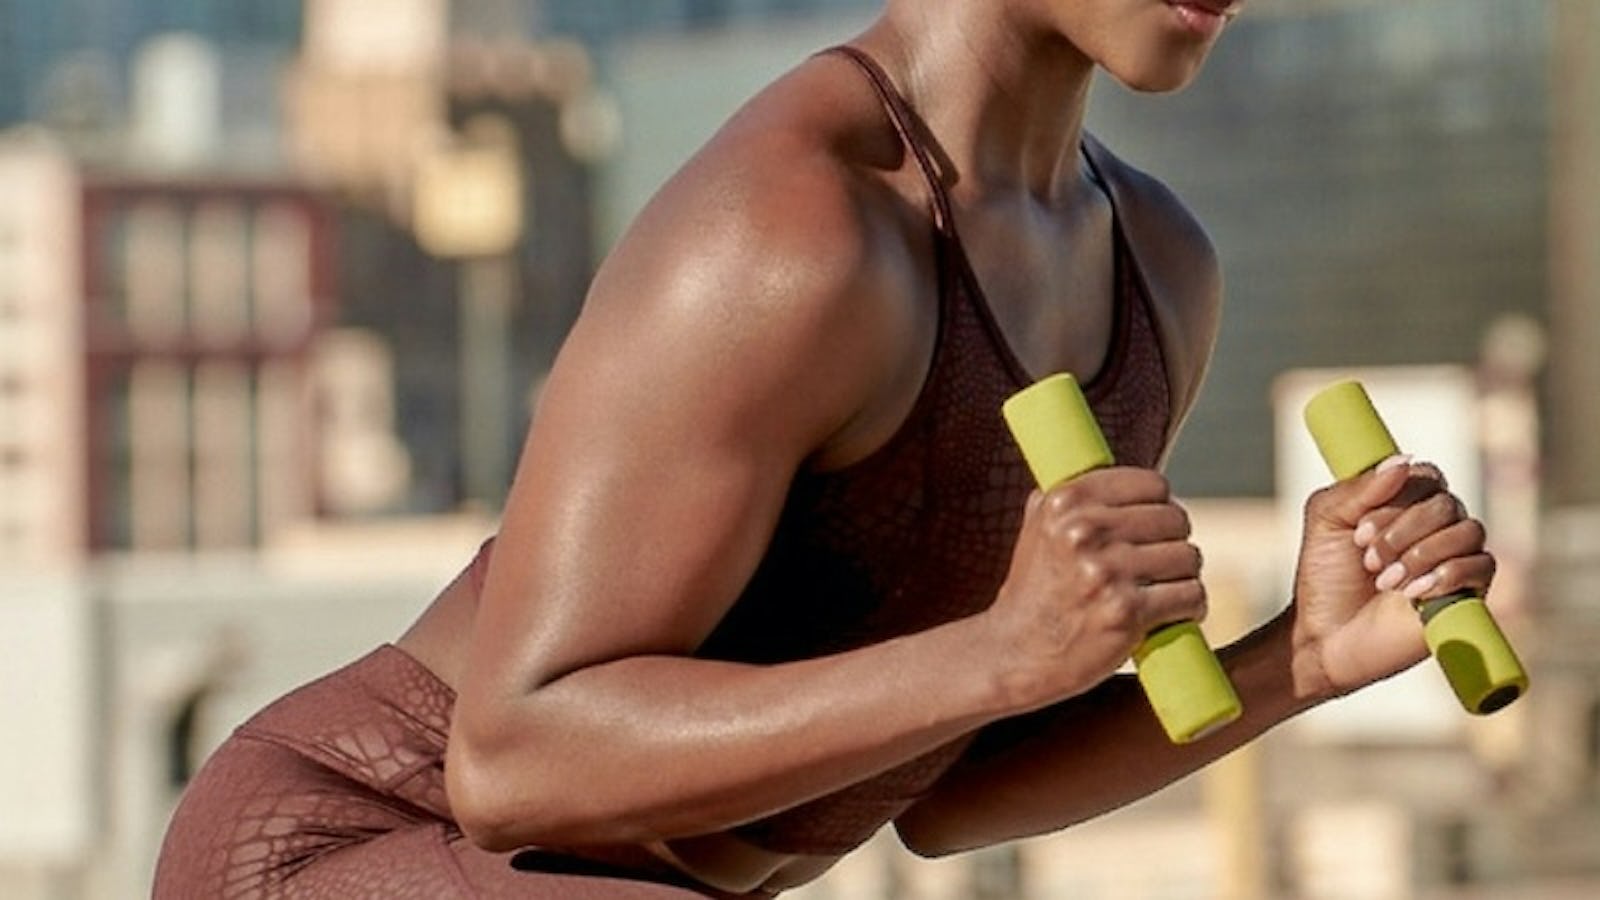 black woman working out in brown exercise set